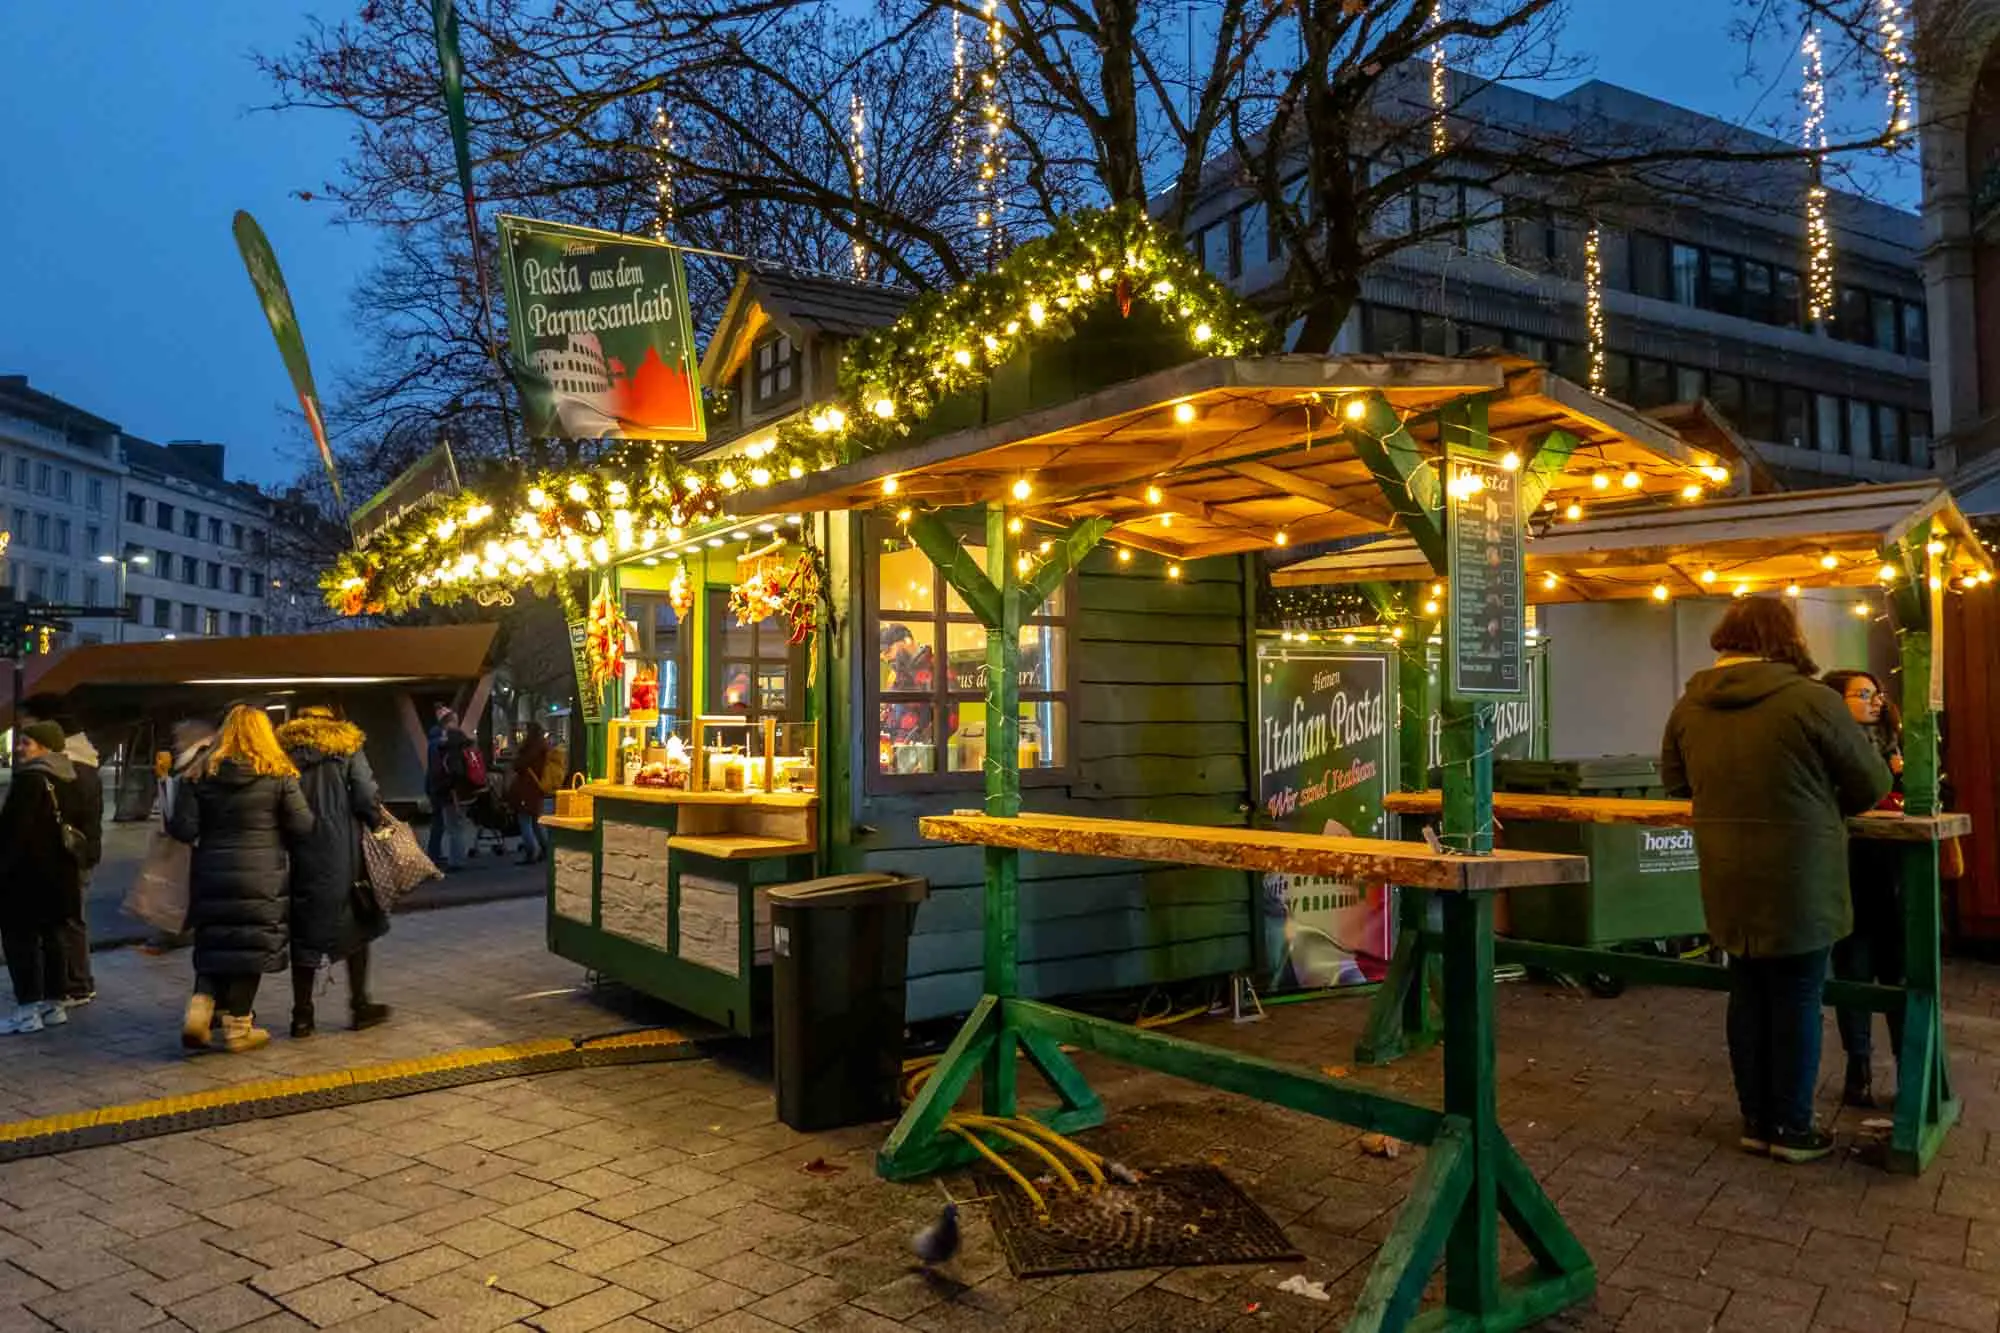 Food stand decorated with lights at night